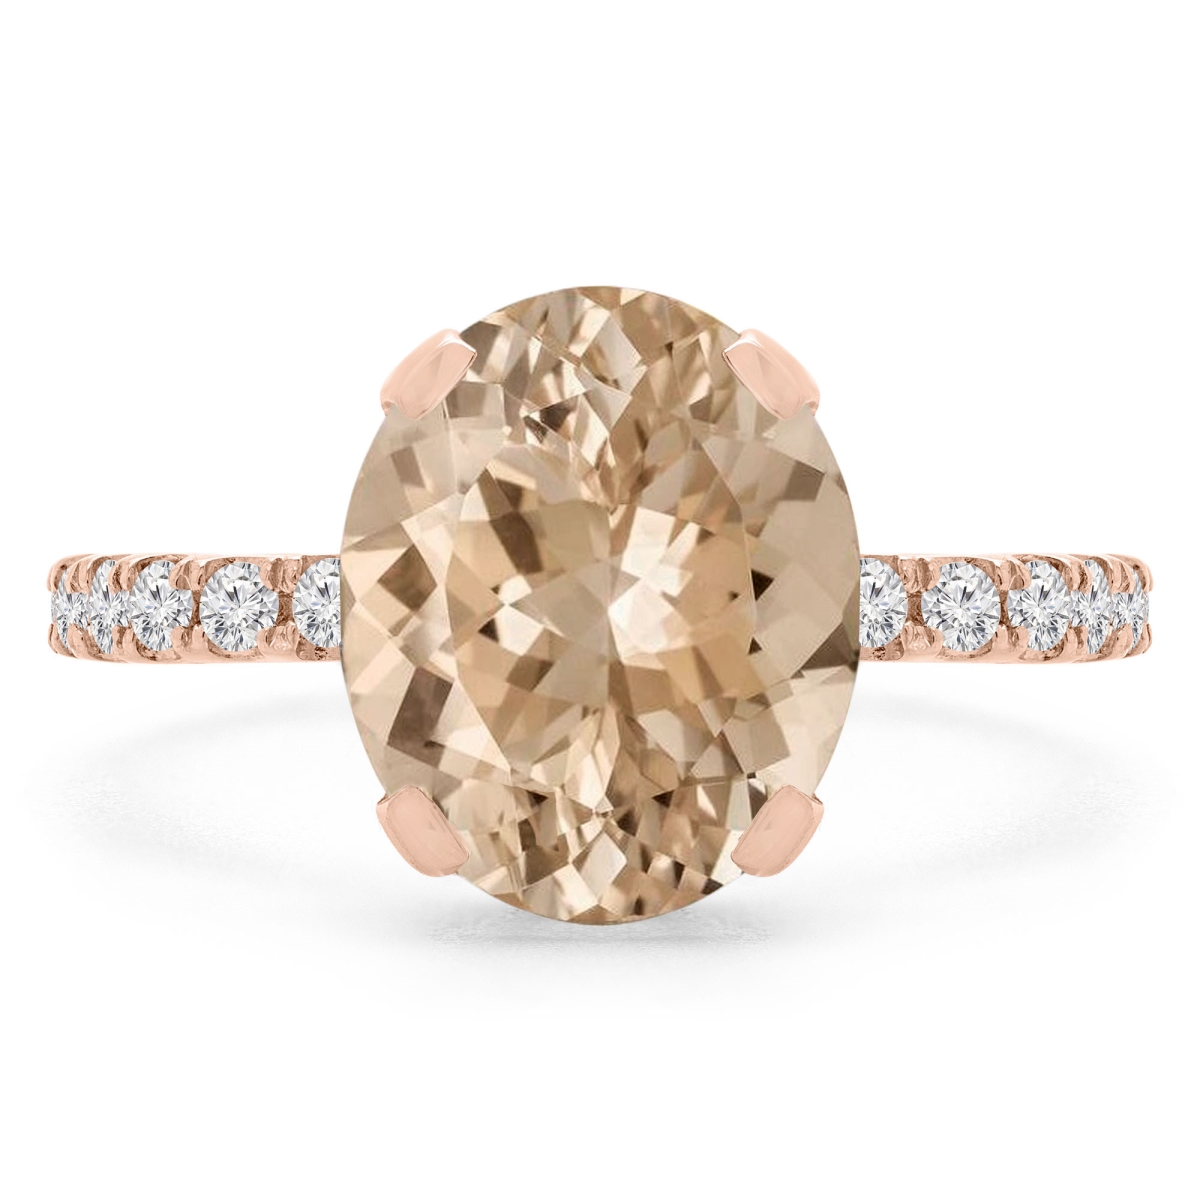 Picture of Majesty Diamonds MD190407-4 3.4 CTW Oval Pink Morganite Under Halo Engagement Ring in 14K Rose Gold - Size 4